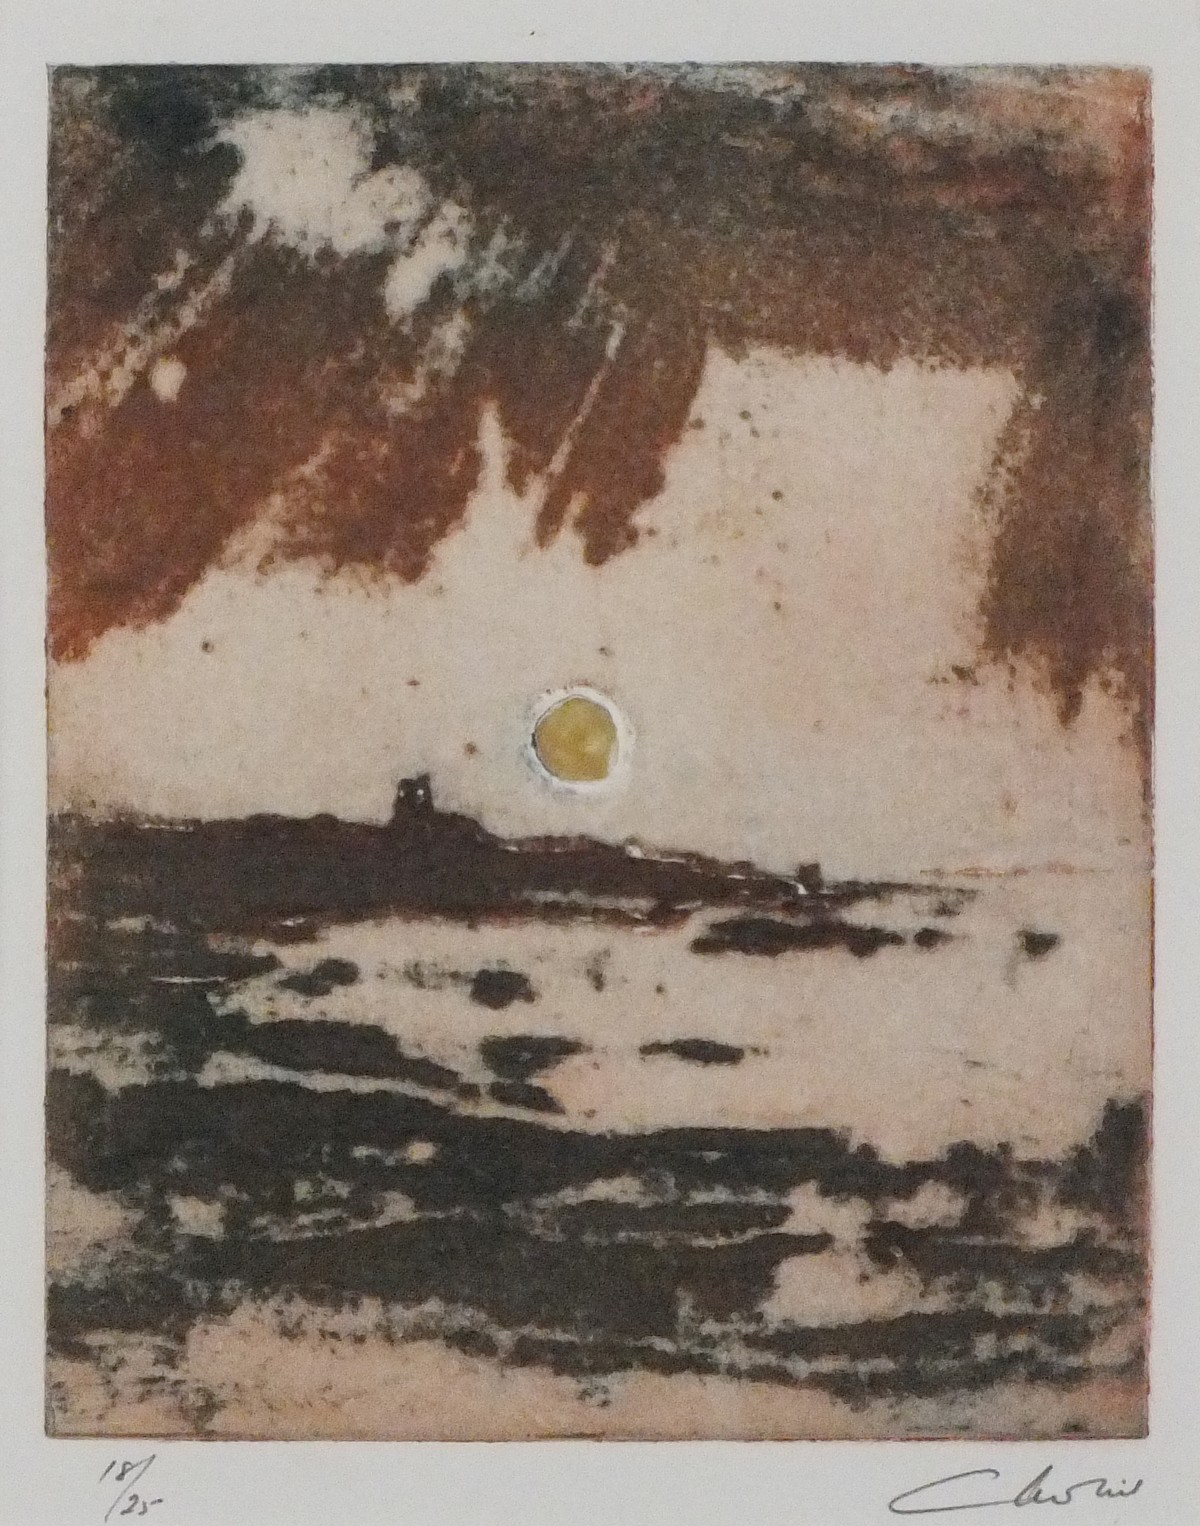 Ian LAURIE (British b. 1933) Penzance Morning, Etching, Signed lower right, numbered 18/25, 6.5" x